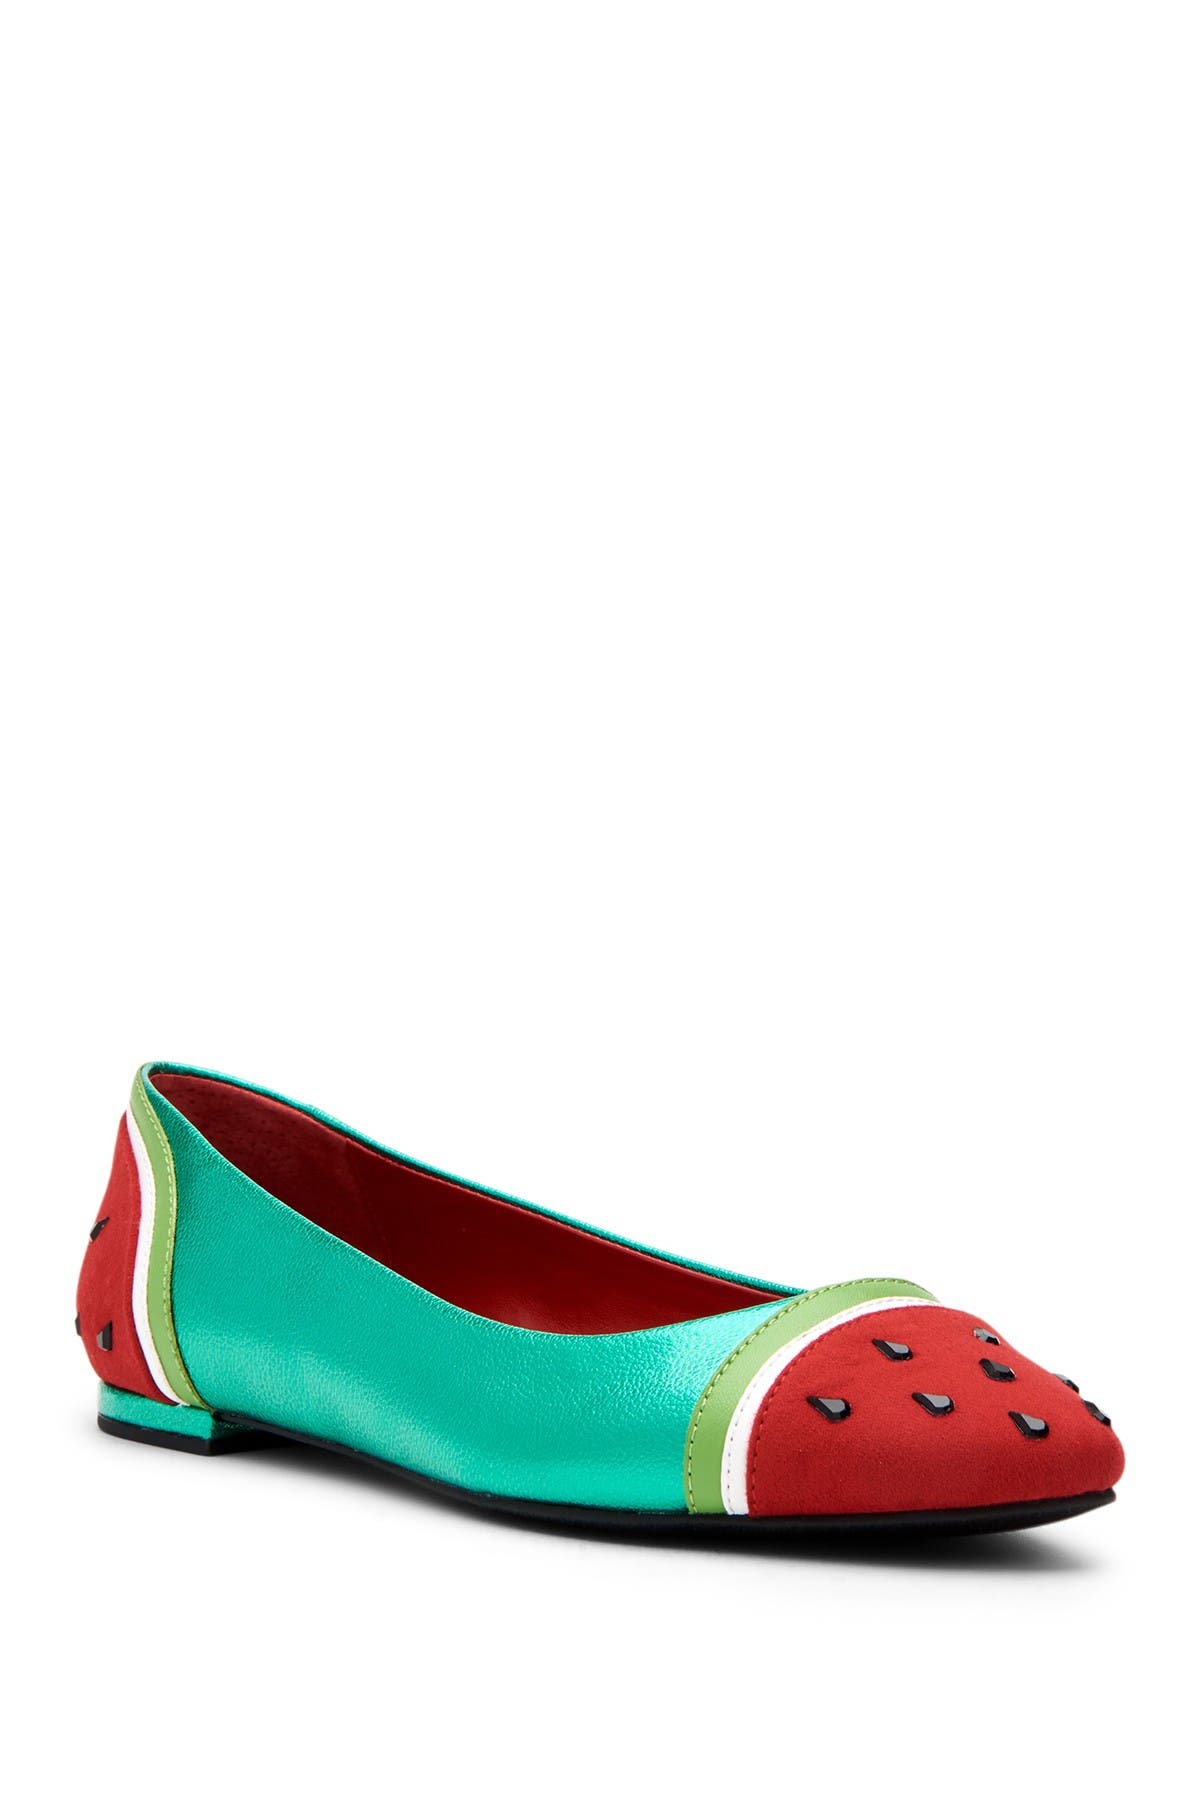 katy perry watermelon shoes